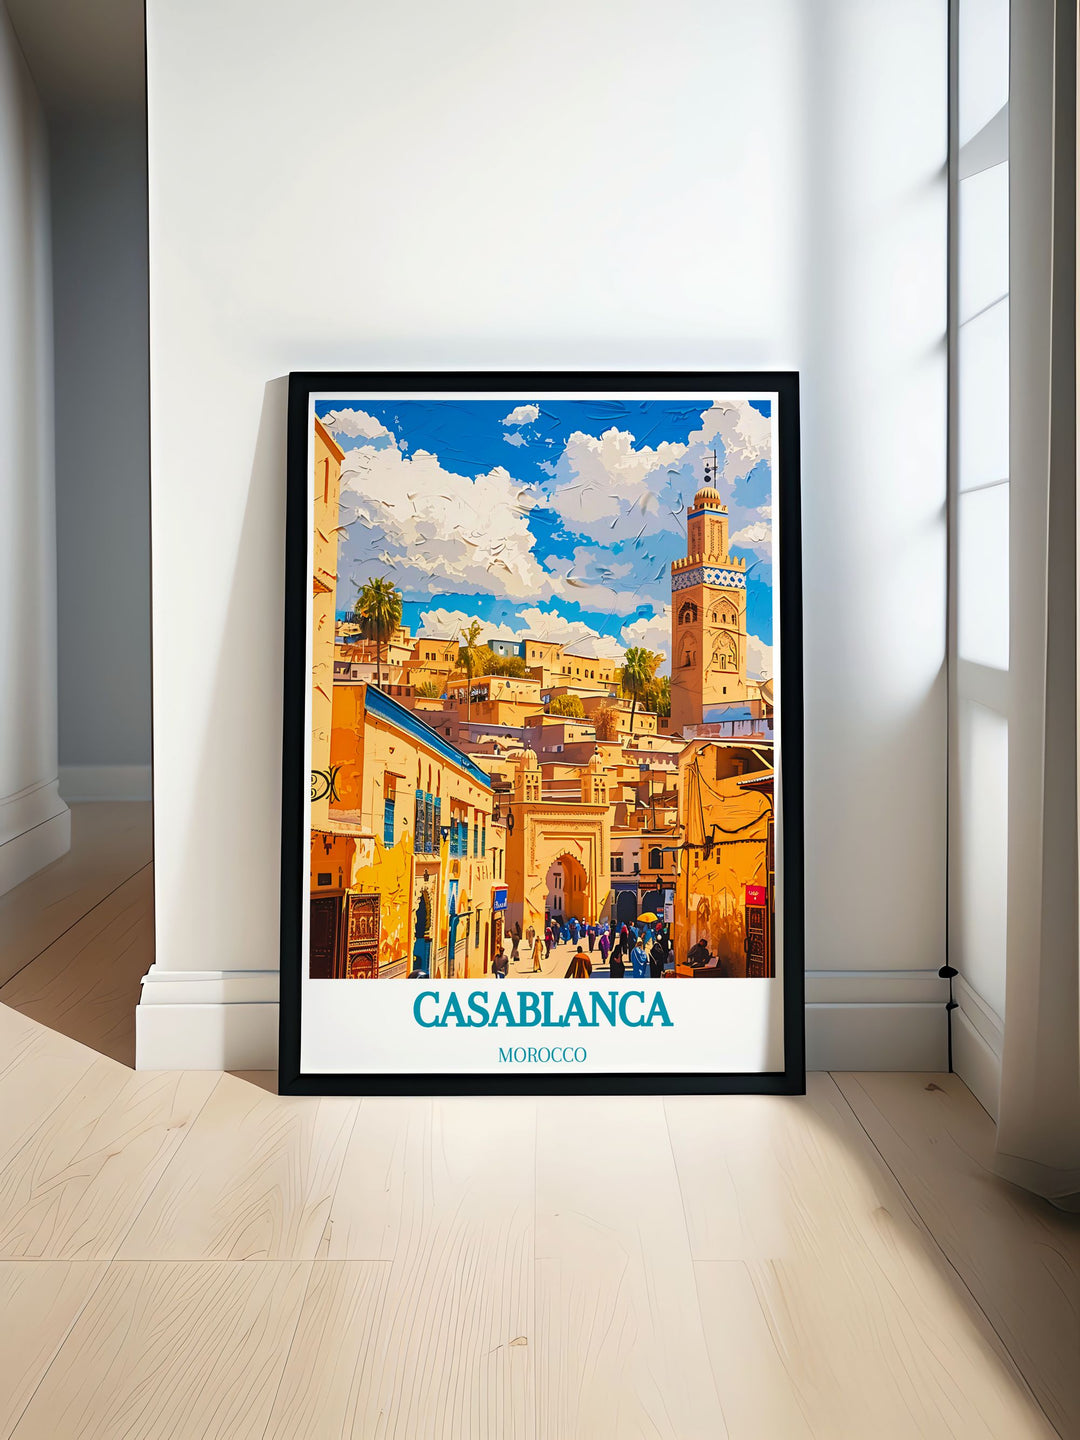 Showcasing Old Medinas historical beauty and Casablancas cultural vibrancy, this poster is ideal for art lovers who appreciate the diverse and stunning landscapes of Morocco.